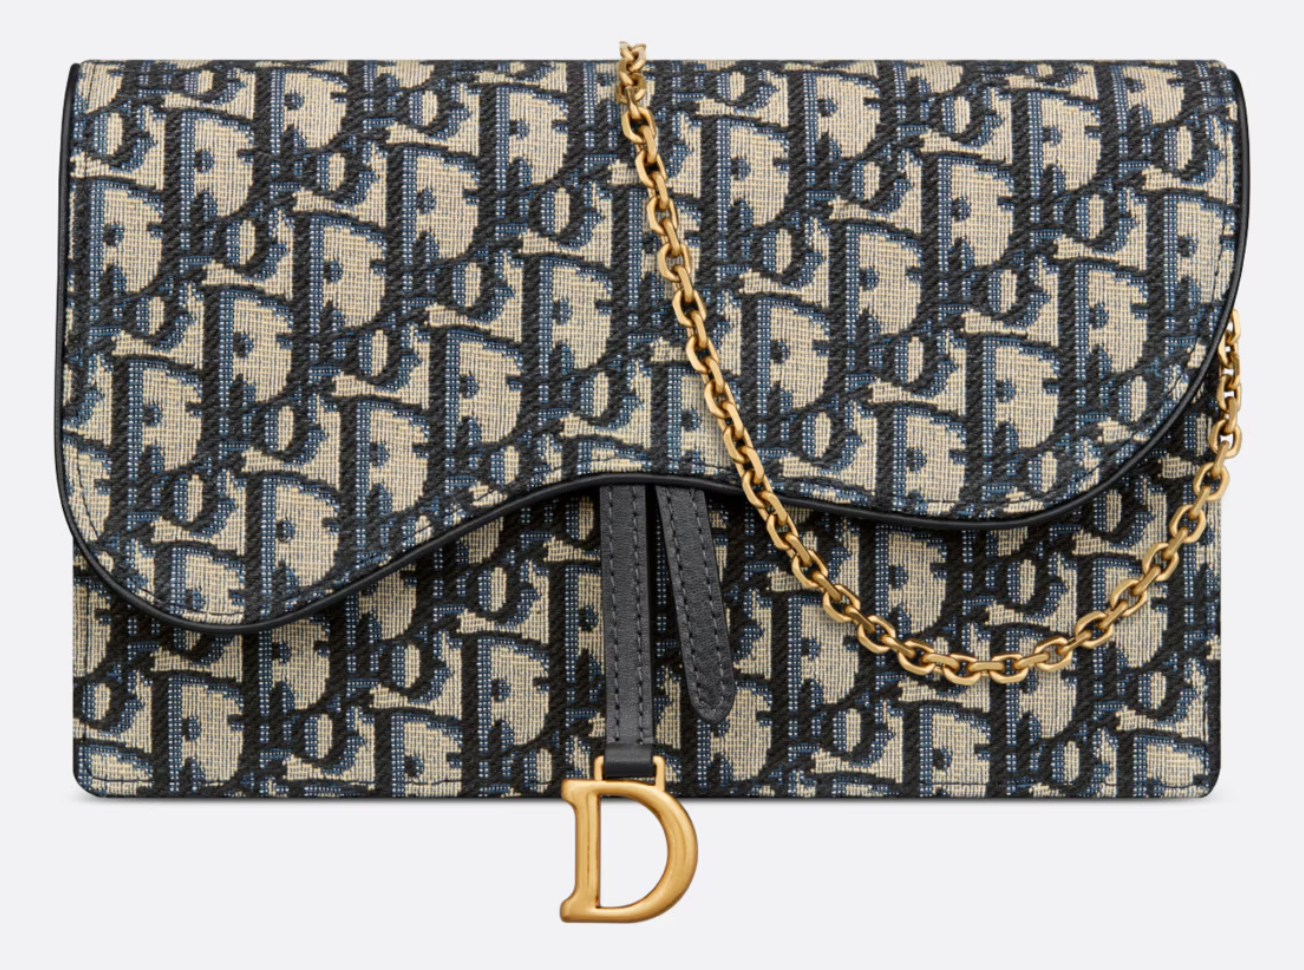 Dior Saddle Pouch